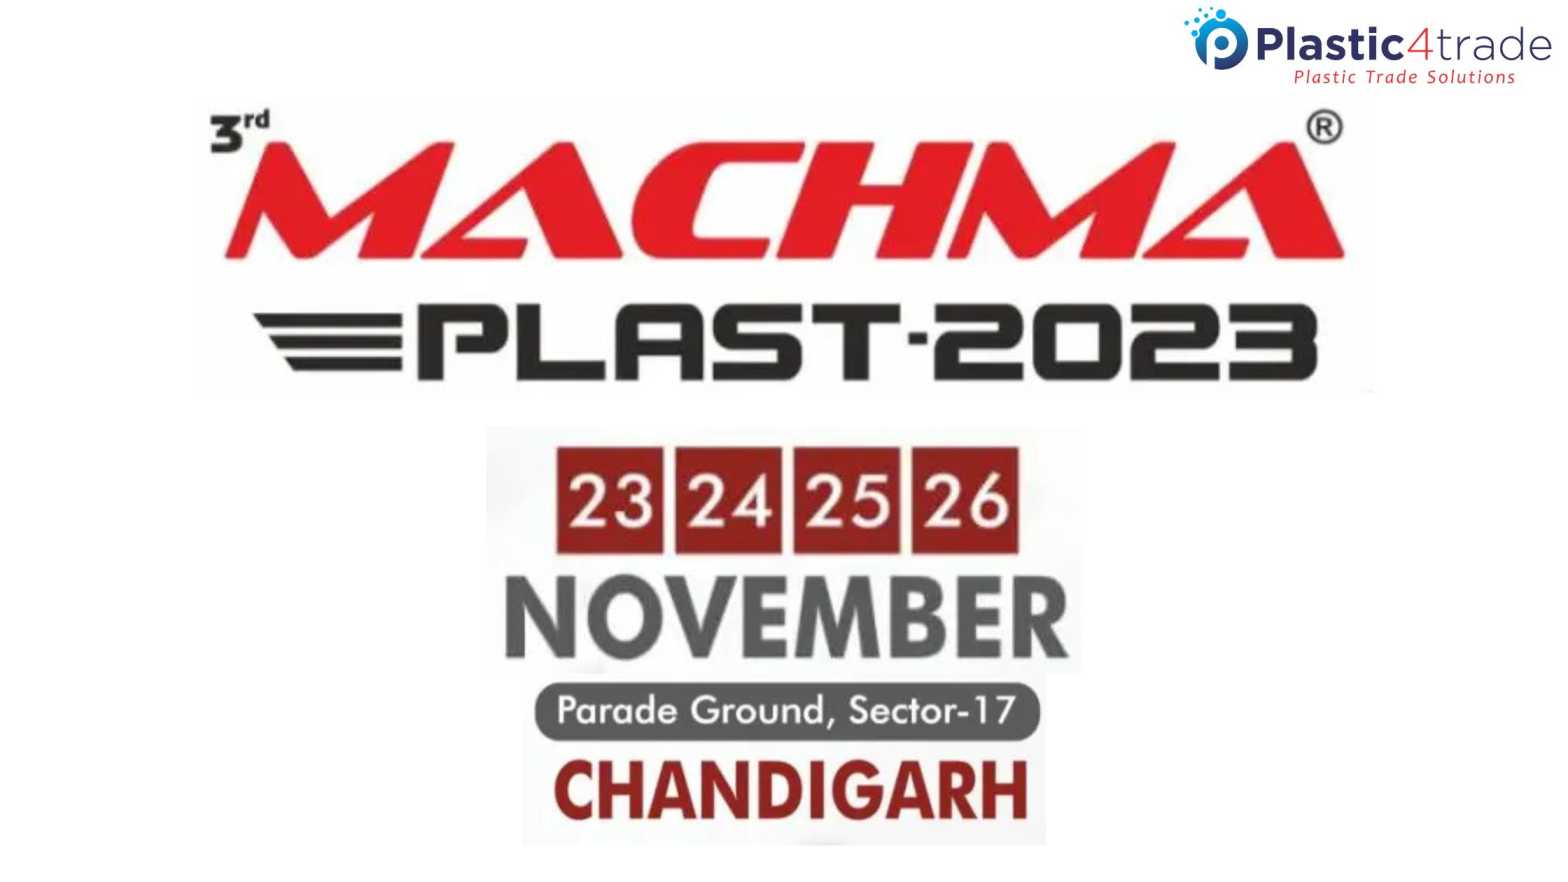 Machma Plastic and Technology Exhibition 2023 in Chandigarh India